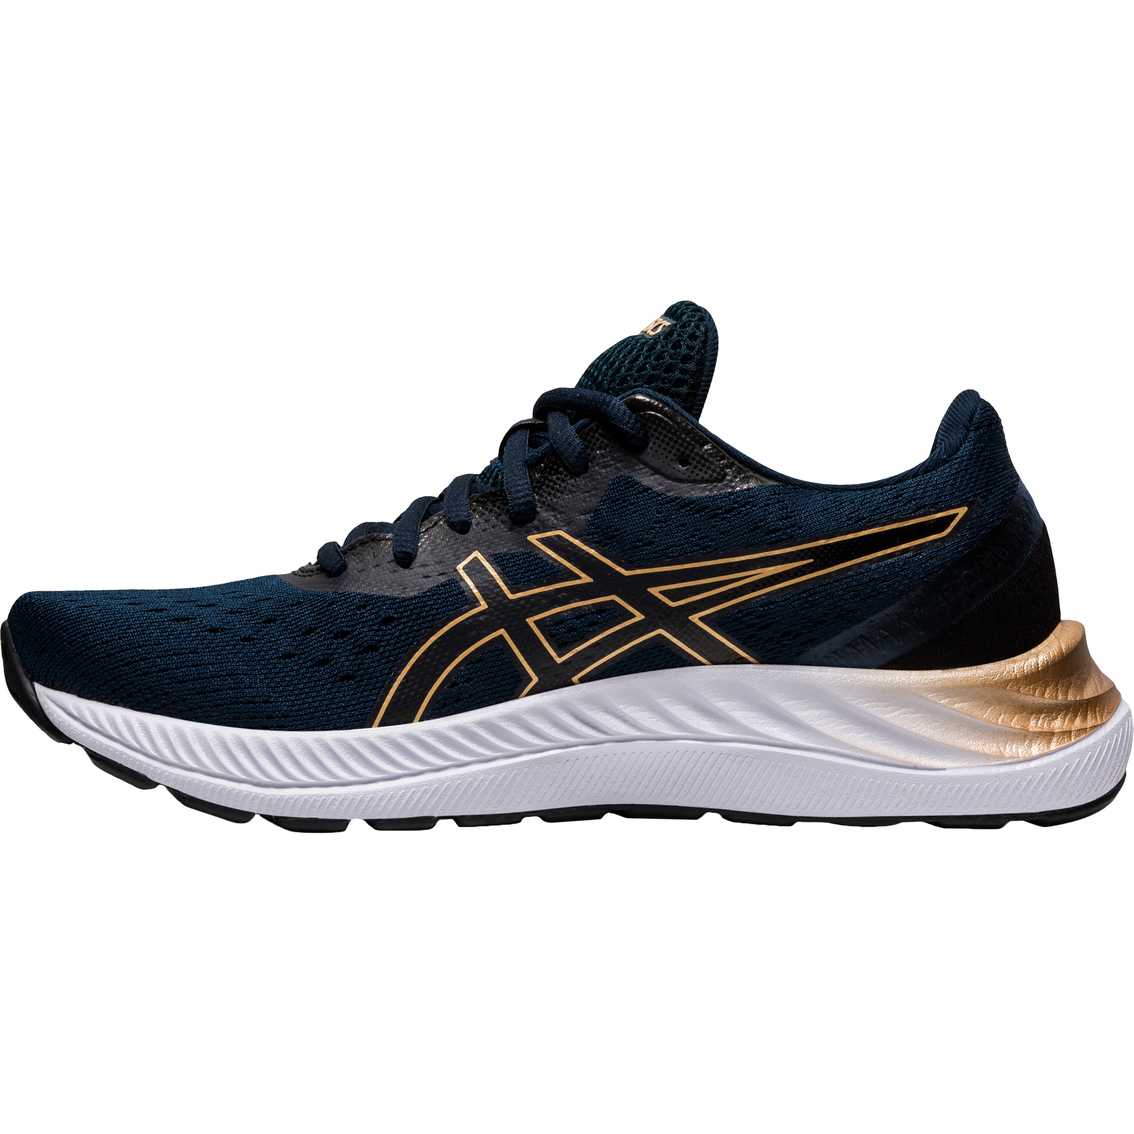 Asics Women's Gel Excite 8 Running Shoes | Women's Athletic Shoes ...